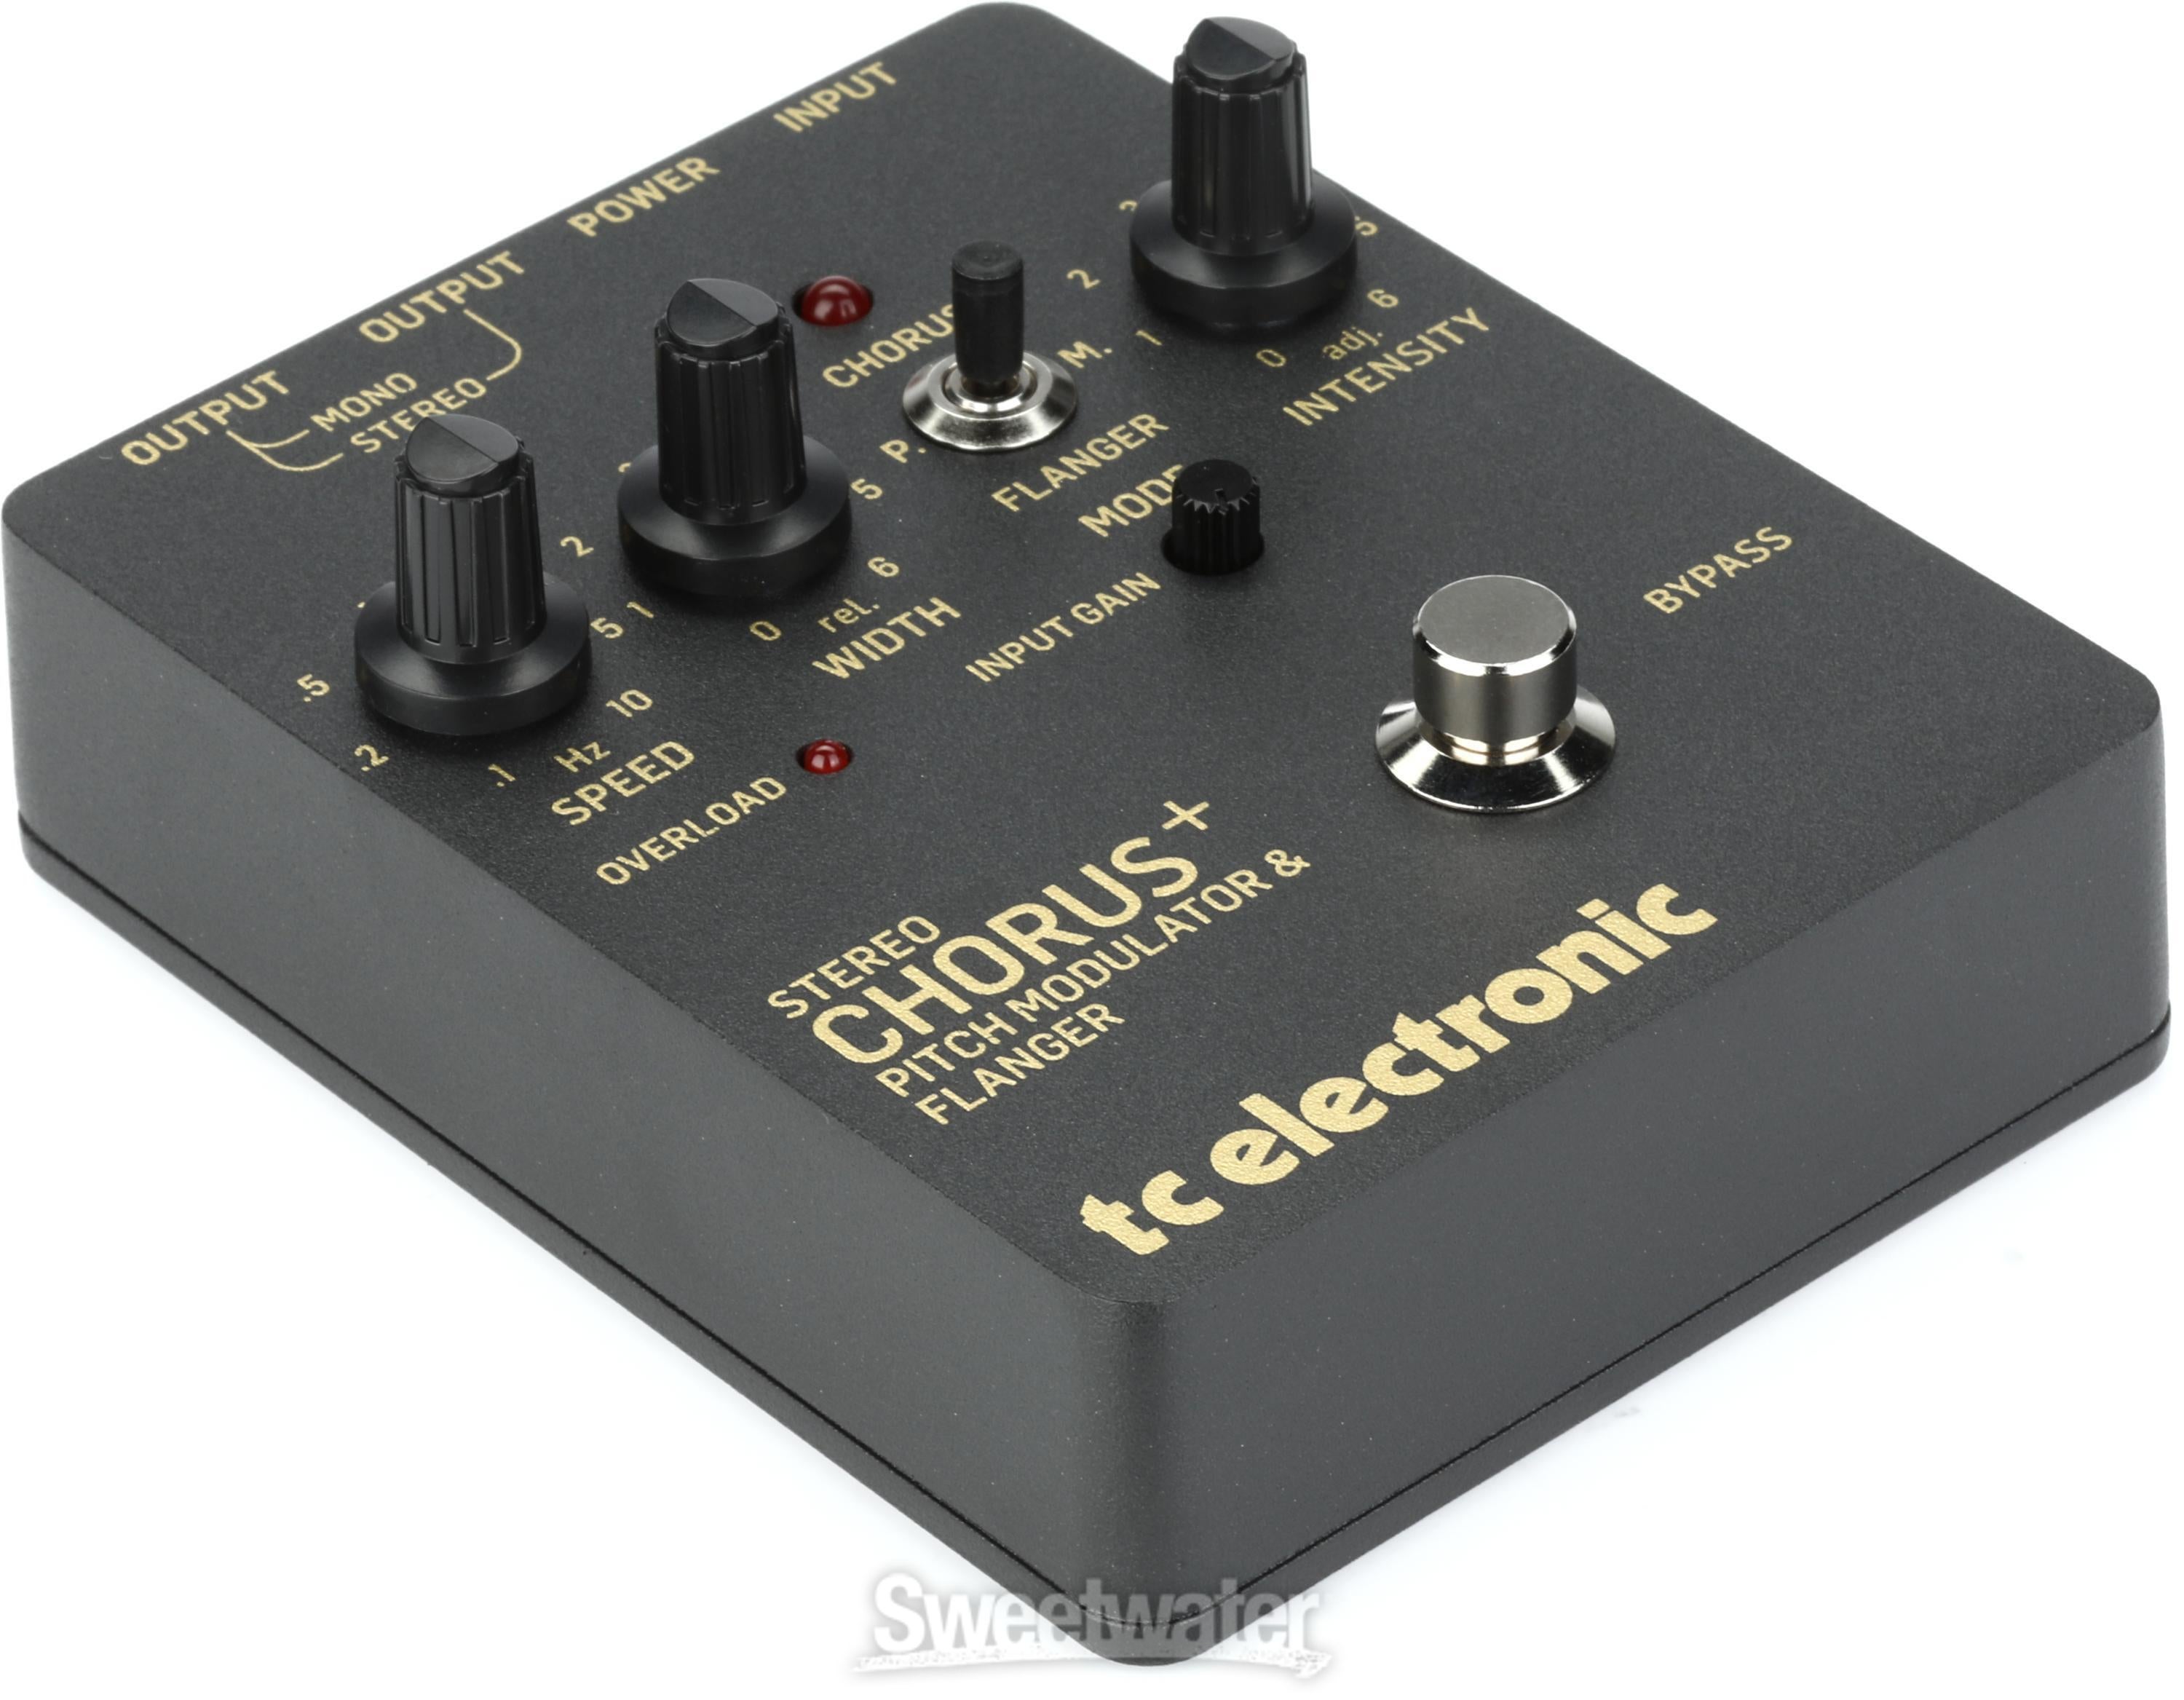 TC Electronic SCF Gold Stereo Chorus Flanger Pedal | Sweetwater